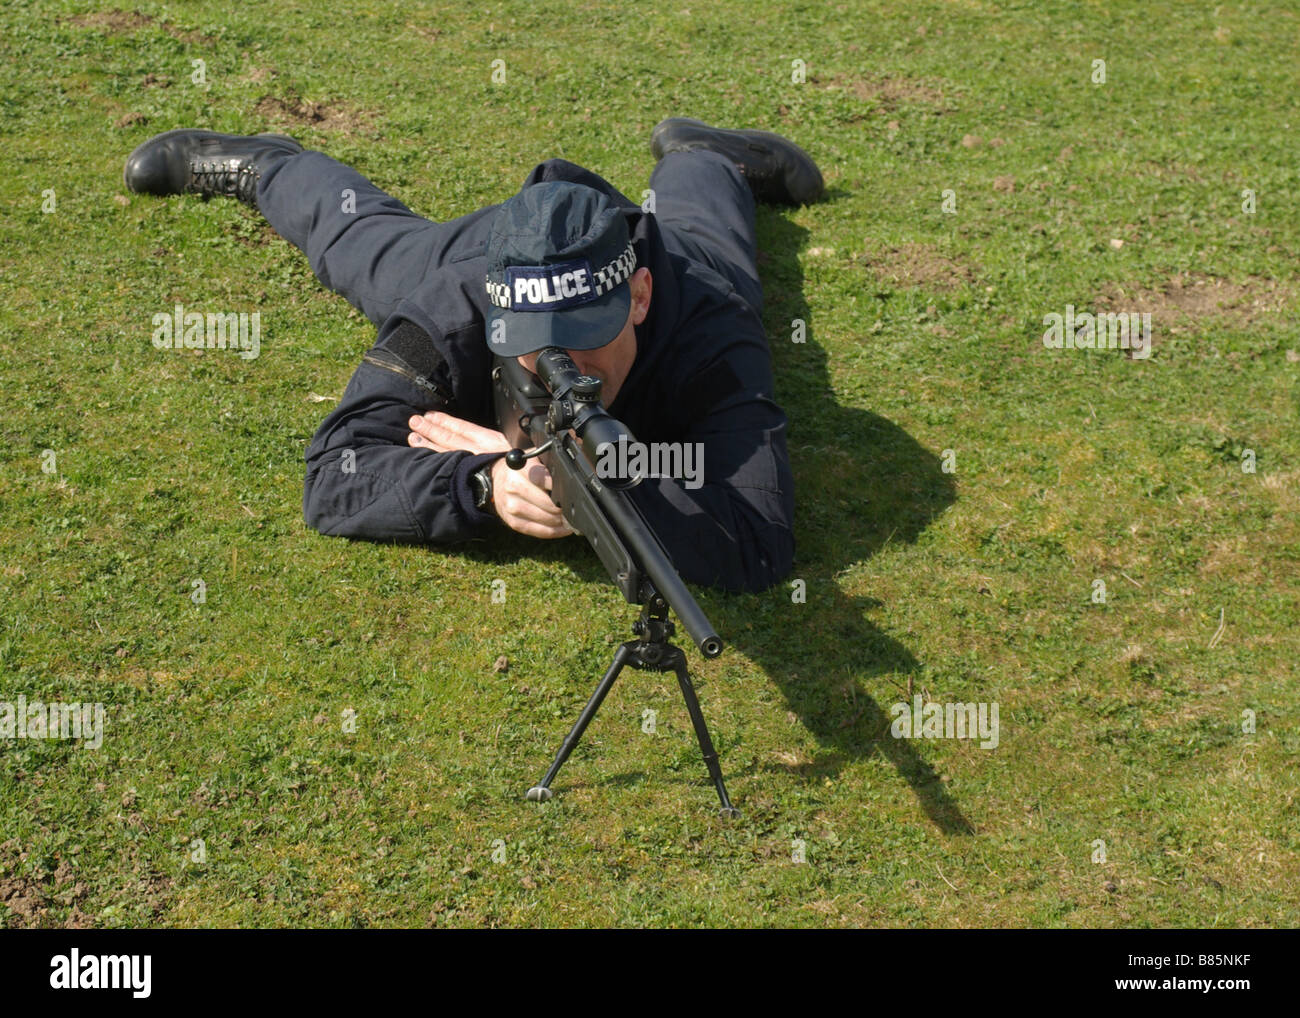 Police sniper with 7 62 Accuracy International AWP rifle in prone position Stock Photo